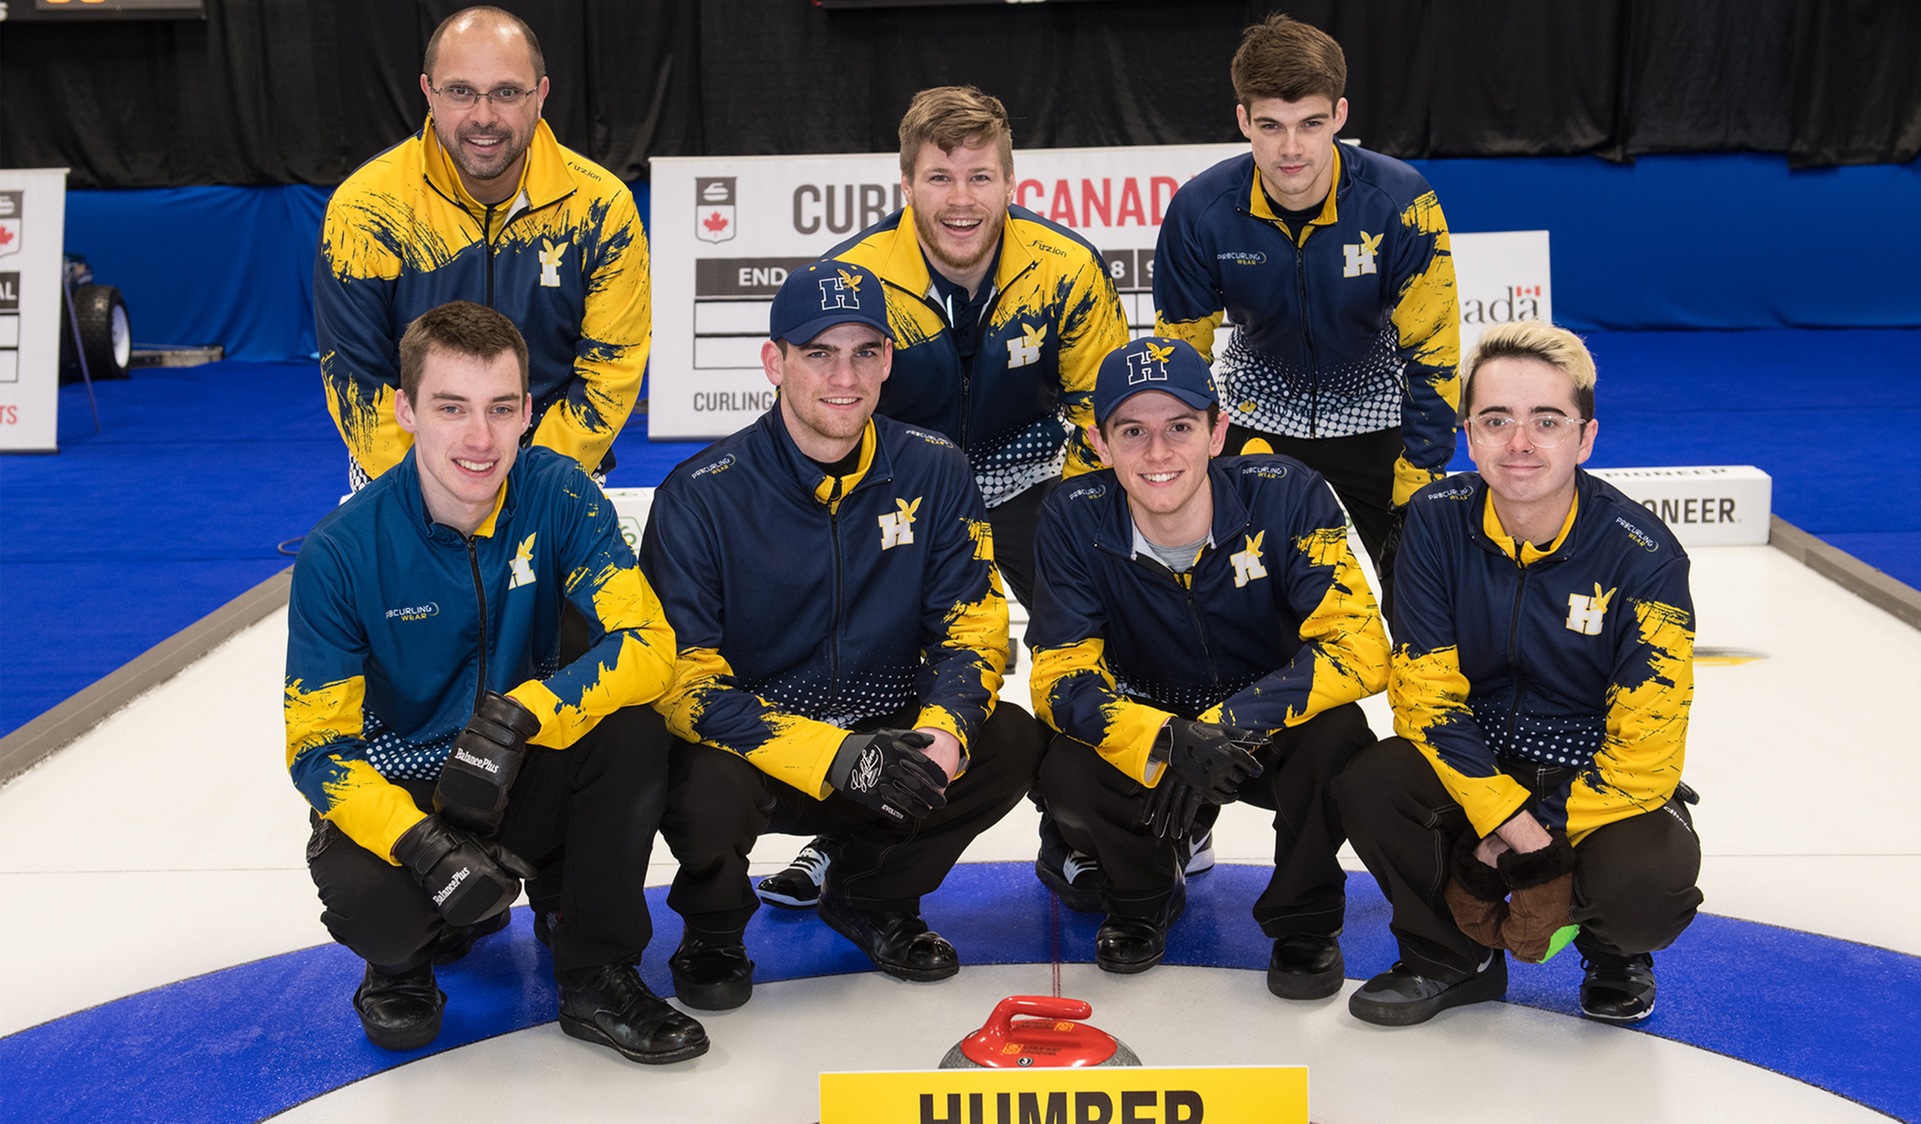 HAWKS MEN DROP BOTH MATCHES ON OPENING DAY AT CURLING NATIONALS